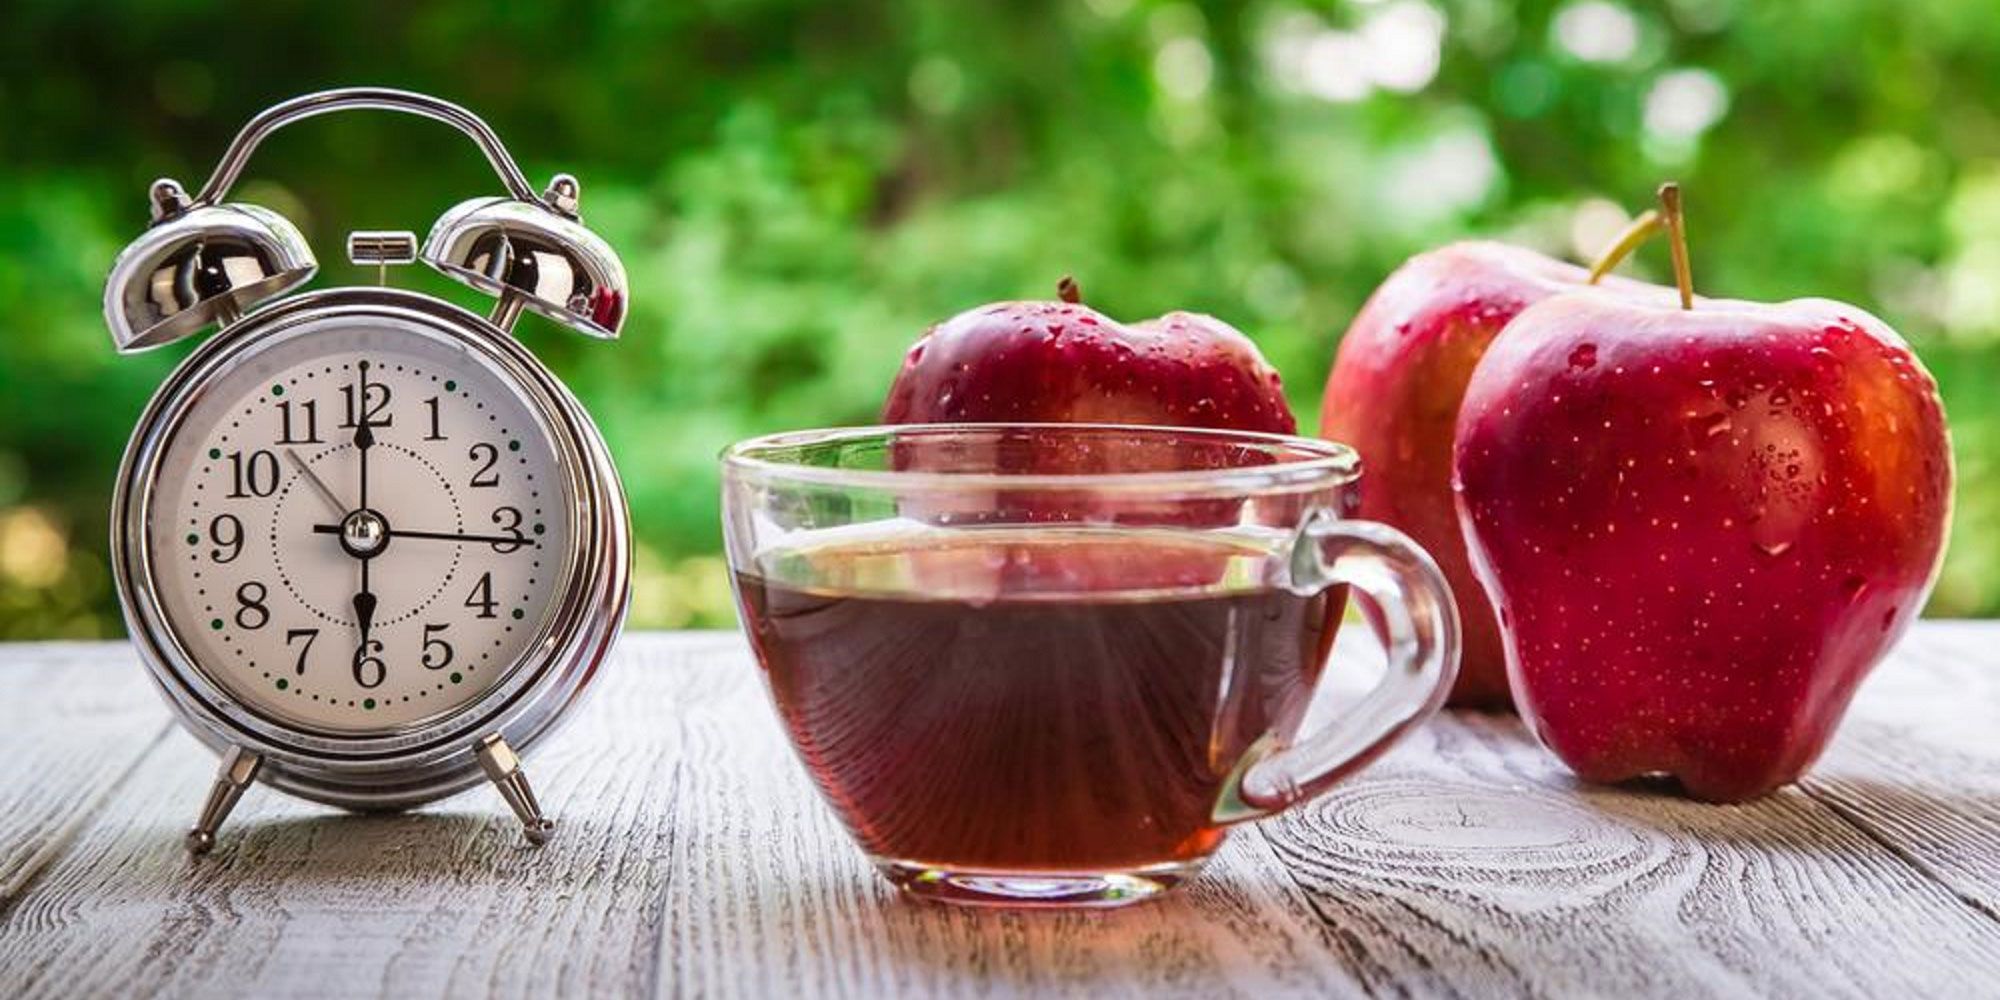 Clock with apples and a cup of tea